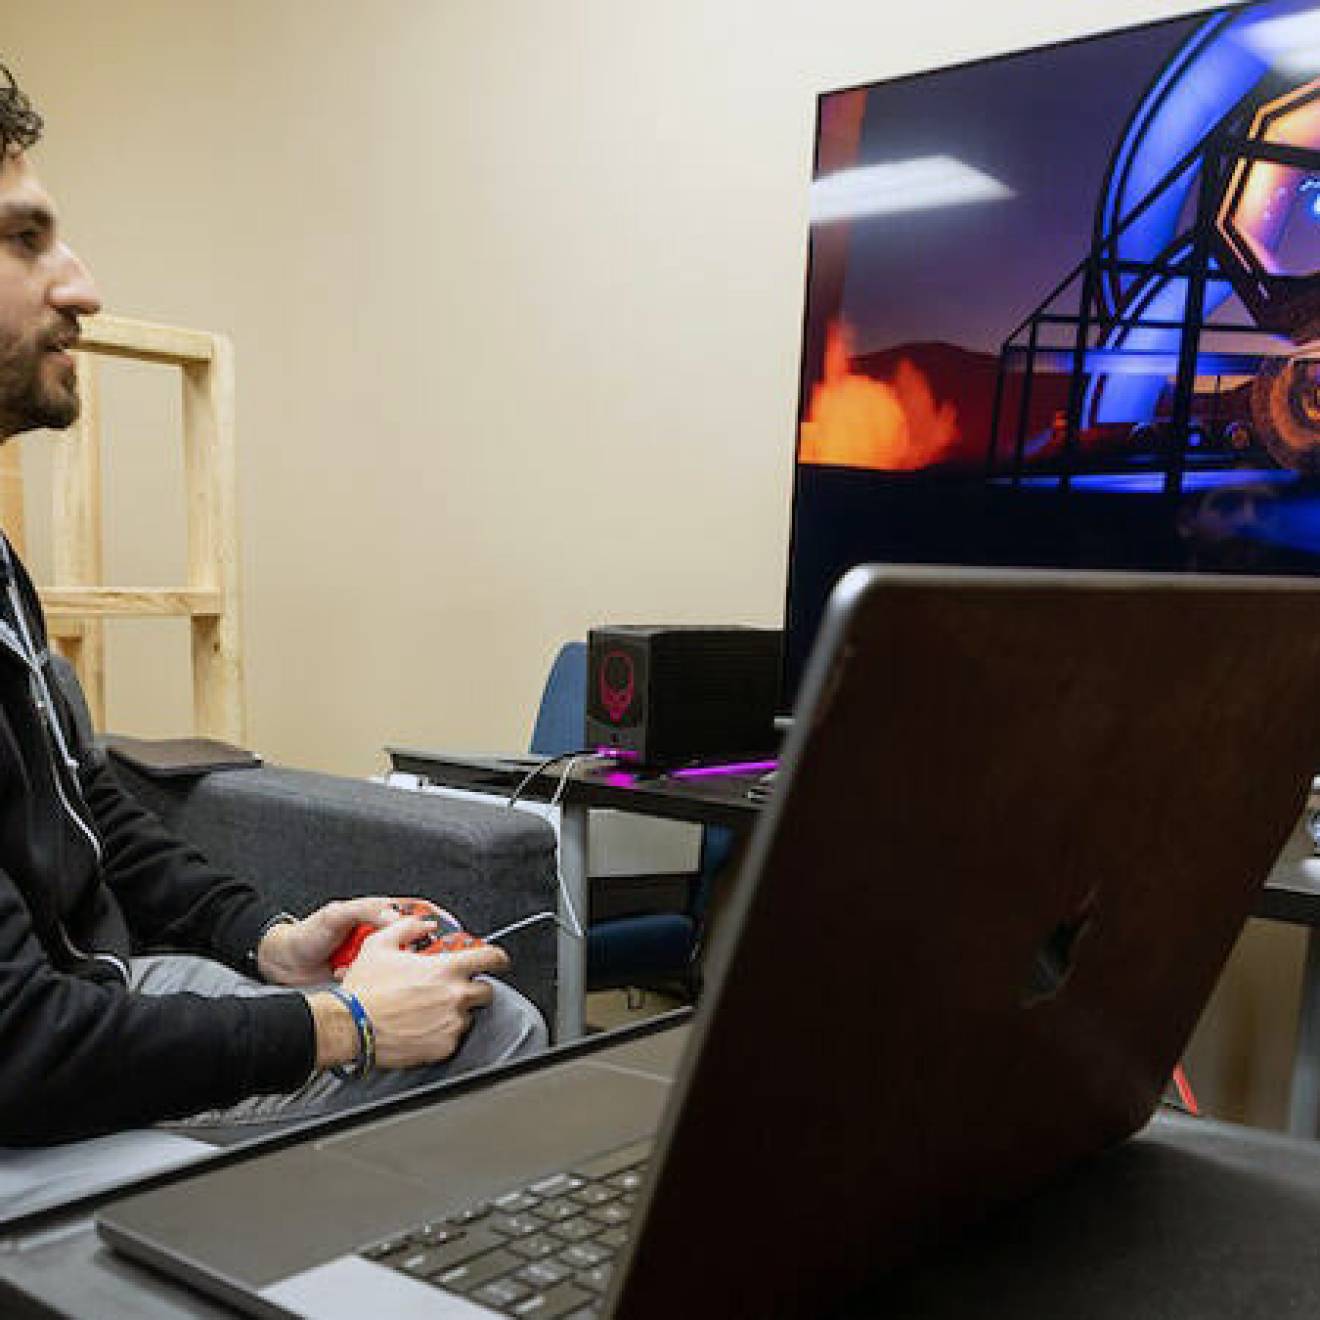 A young man with a beard playing a video game